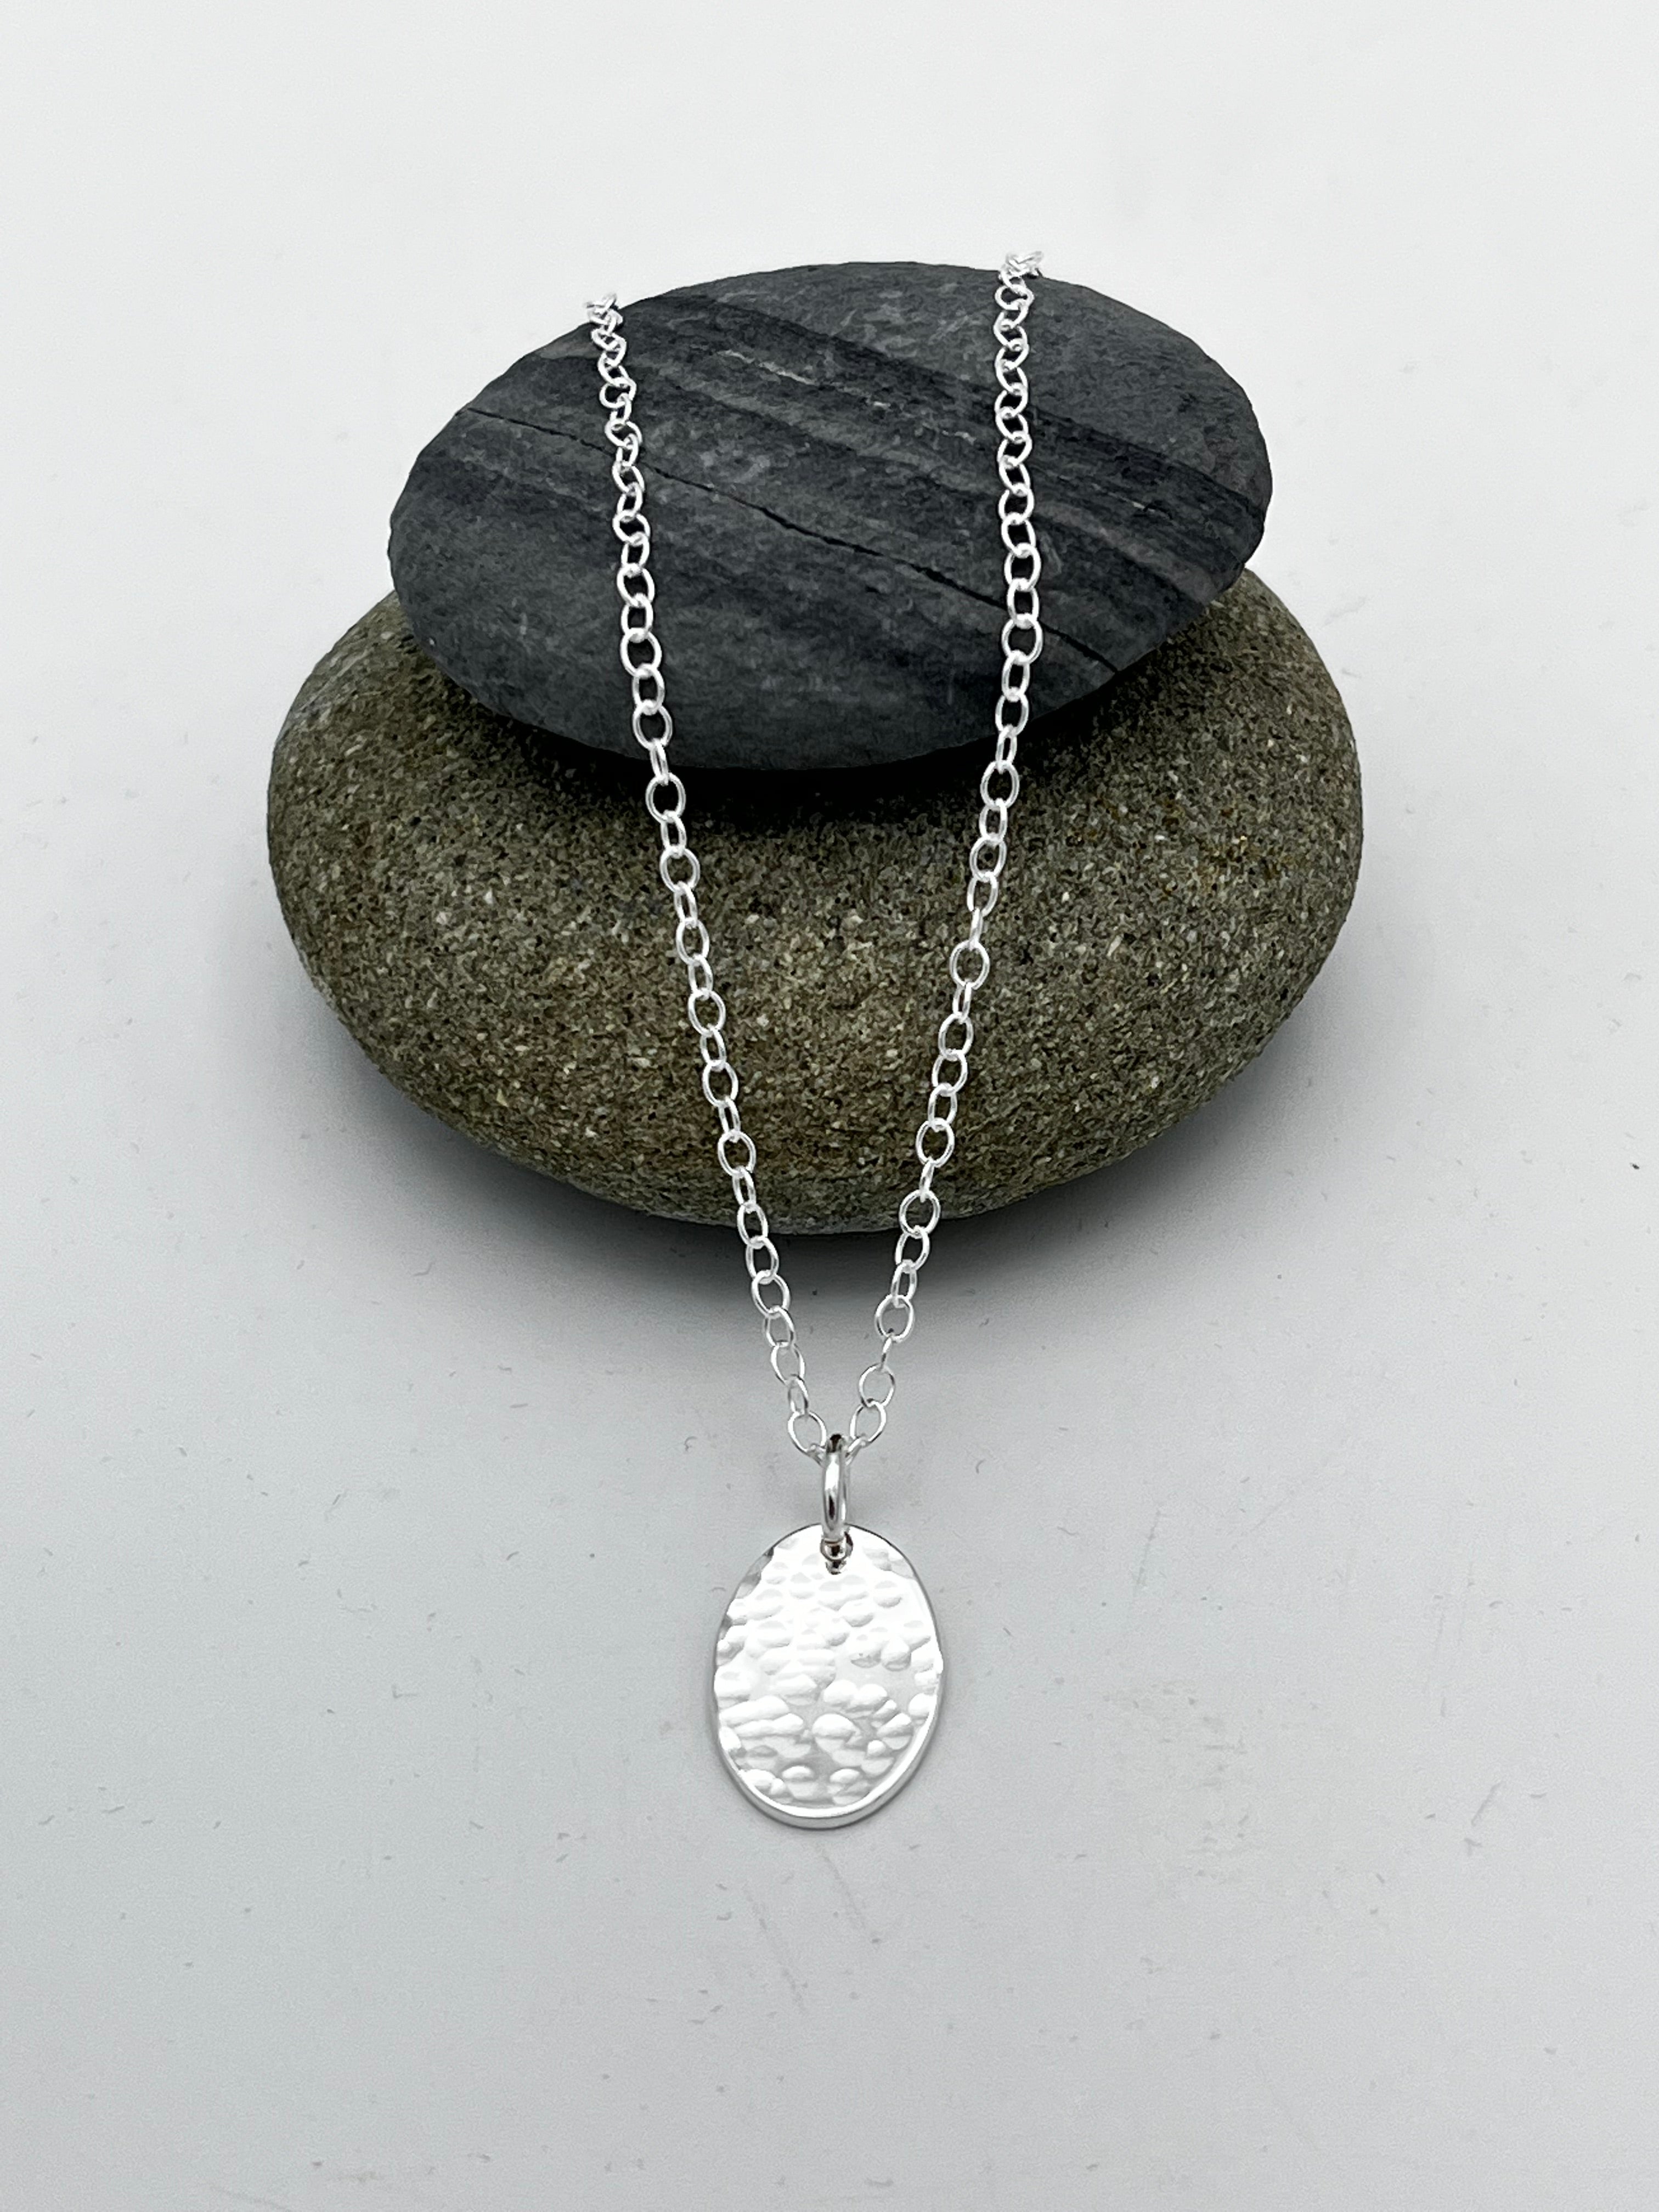 Oval disc pendant 15mm long hammered finish on 16" chain